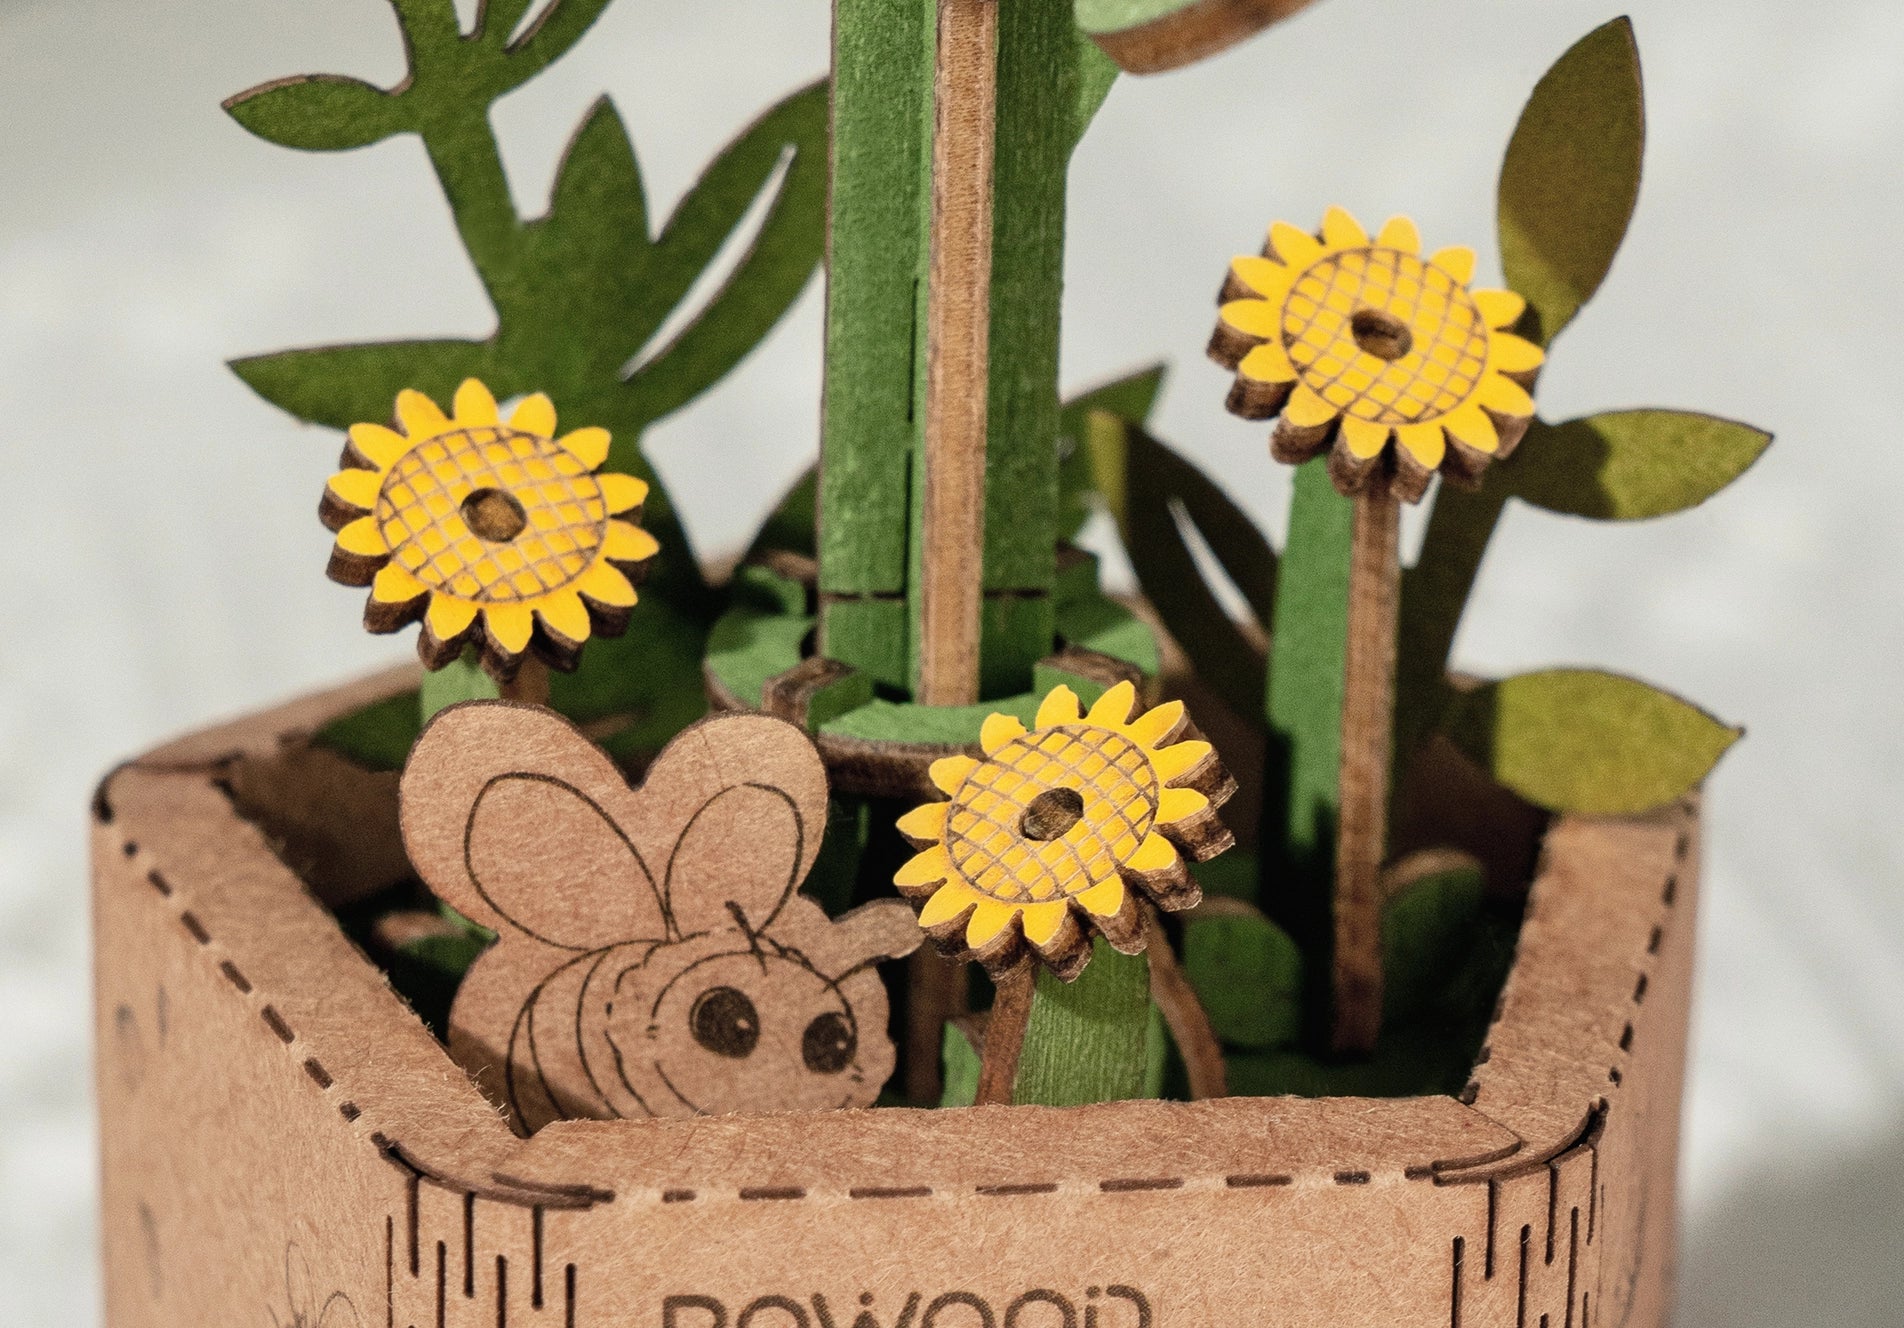 Wooden sunflower DIY puzzle with flowers, bee, and plant details. Enhance your crafting skills with this unique gift from Robotime-Rolife. Dimensions: 5.9 x 5.3 x 2.1 in.